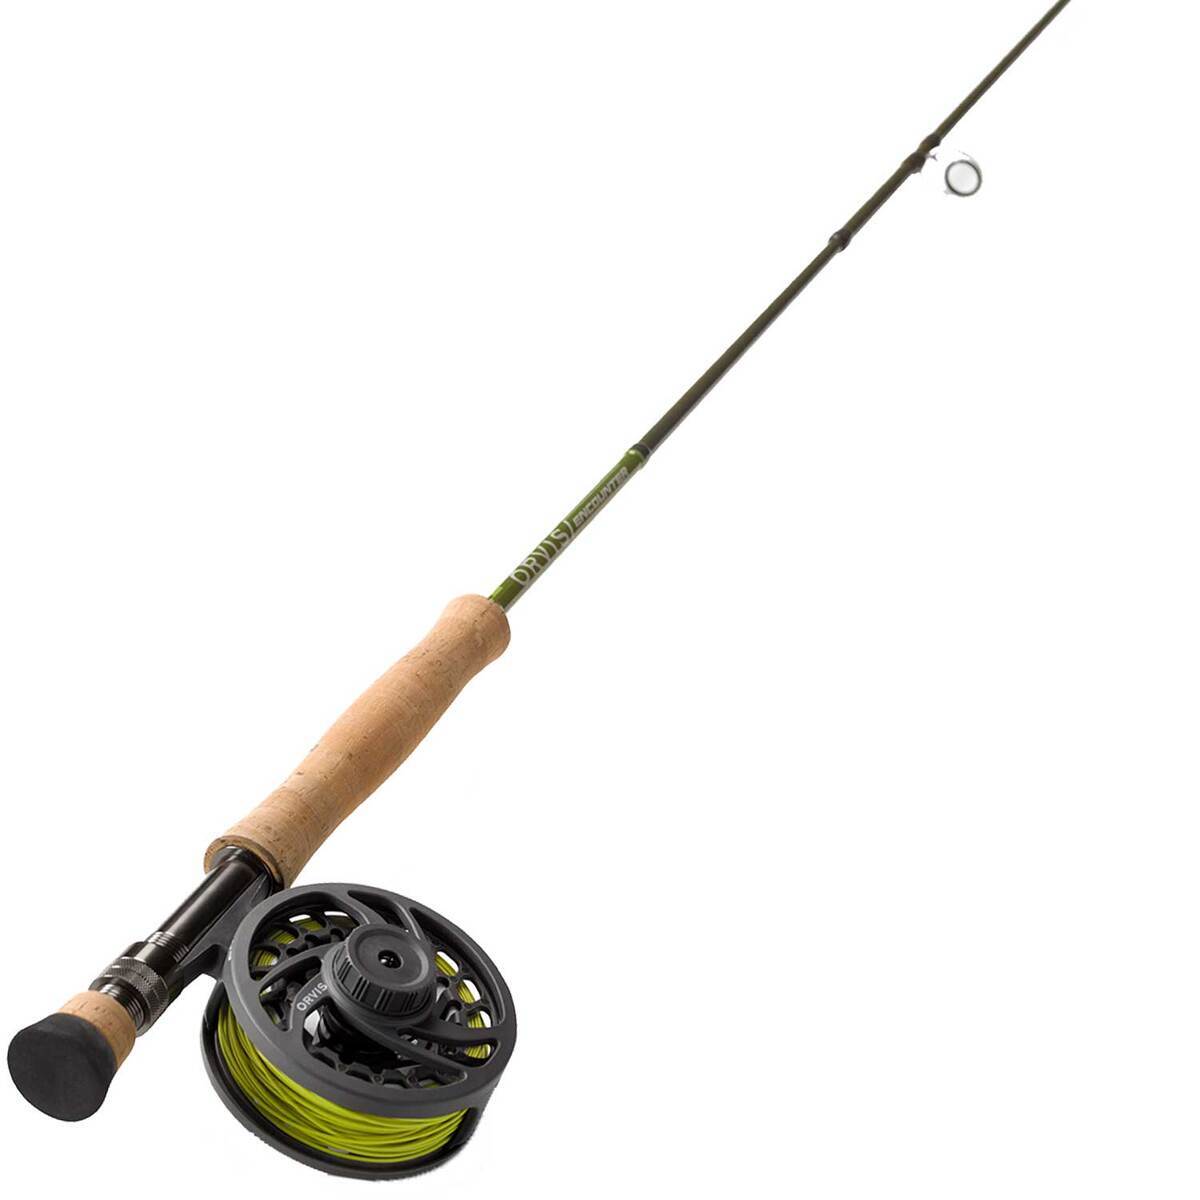  Fenwick Eagle XP Fly Reel and Fishing Rod Outfit